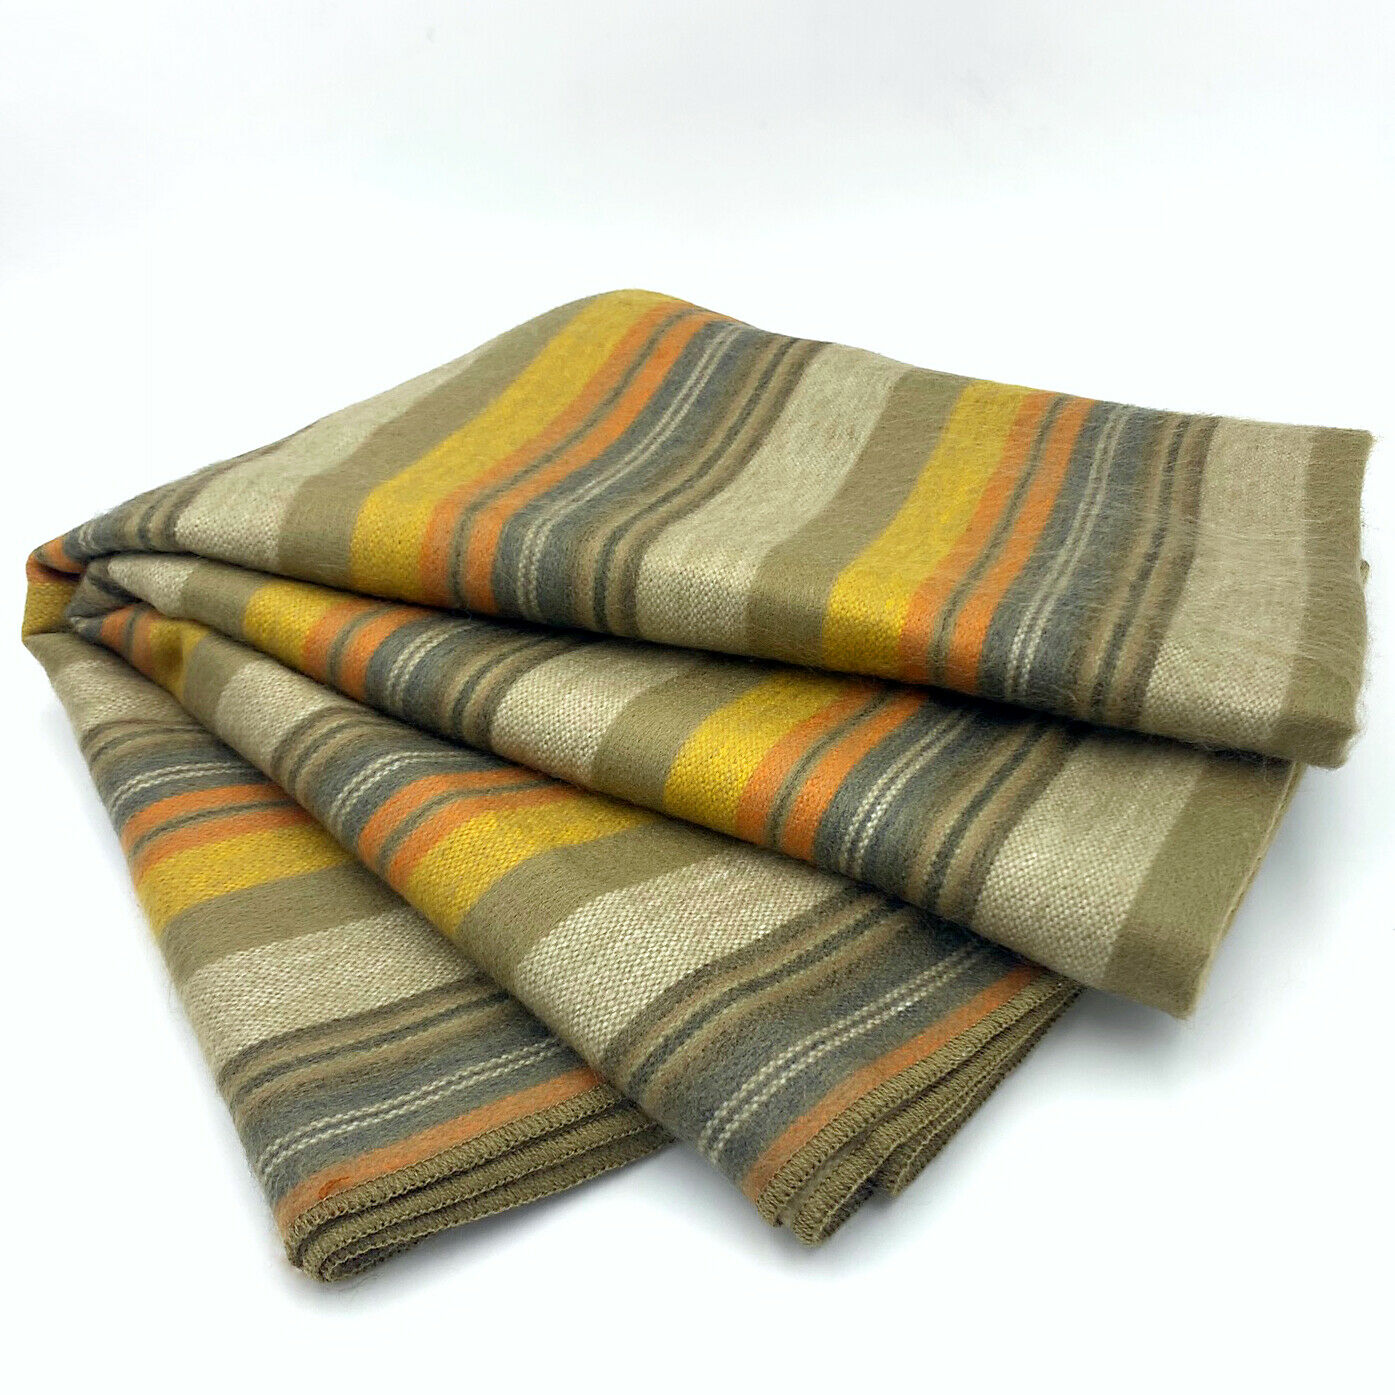 Rumi - Baby Alpaca Wool Throw Blanket / Sofa Cover - Queen 90" x 65" - multi colored thin stripes pattern